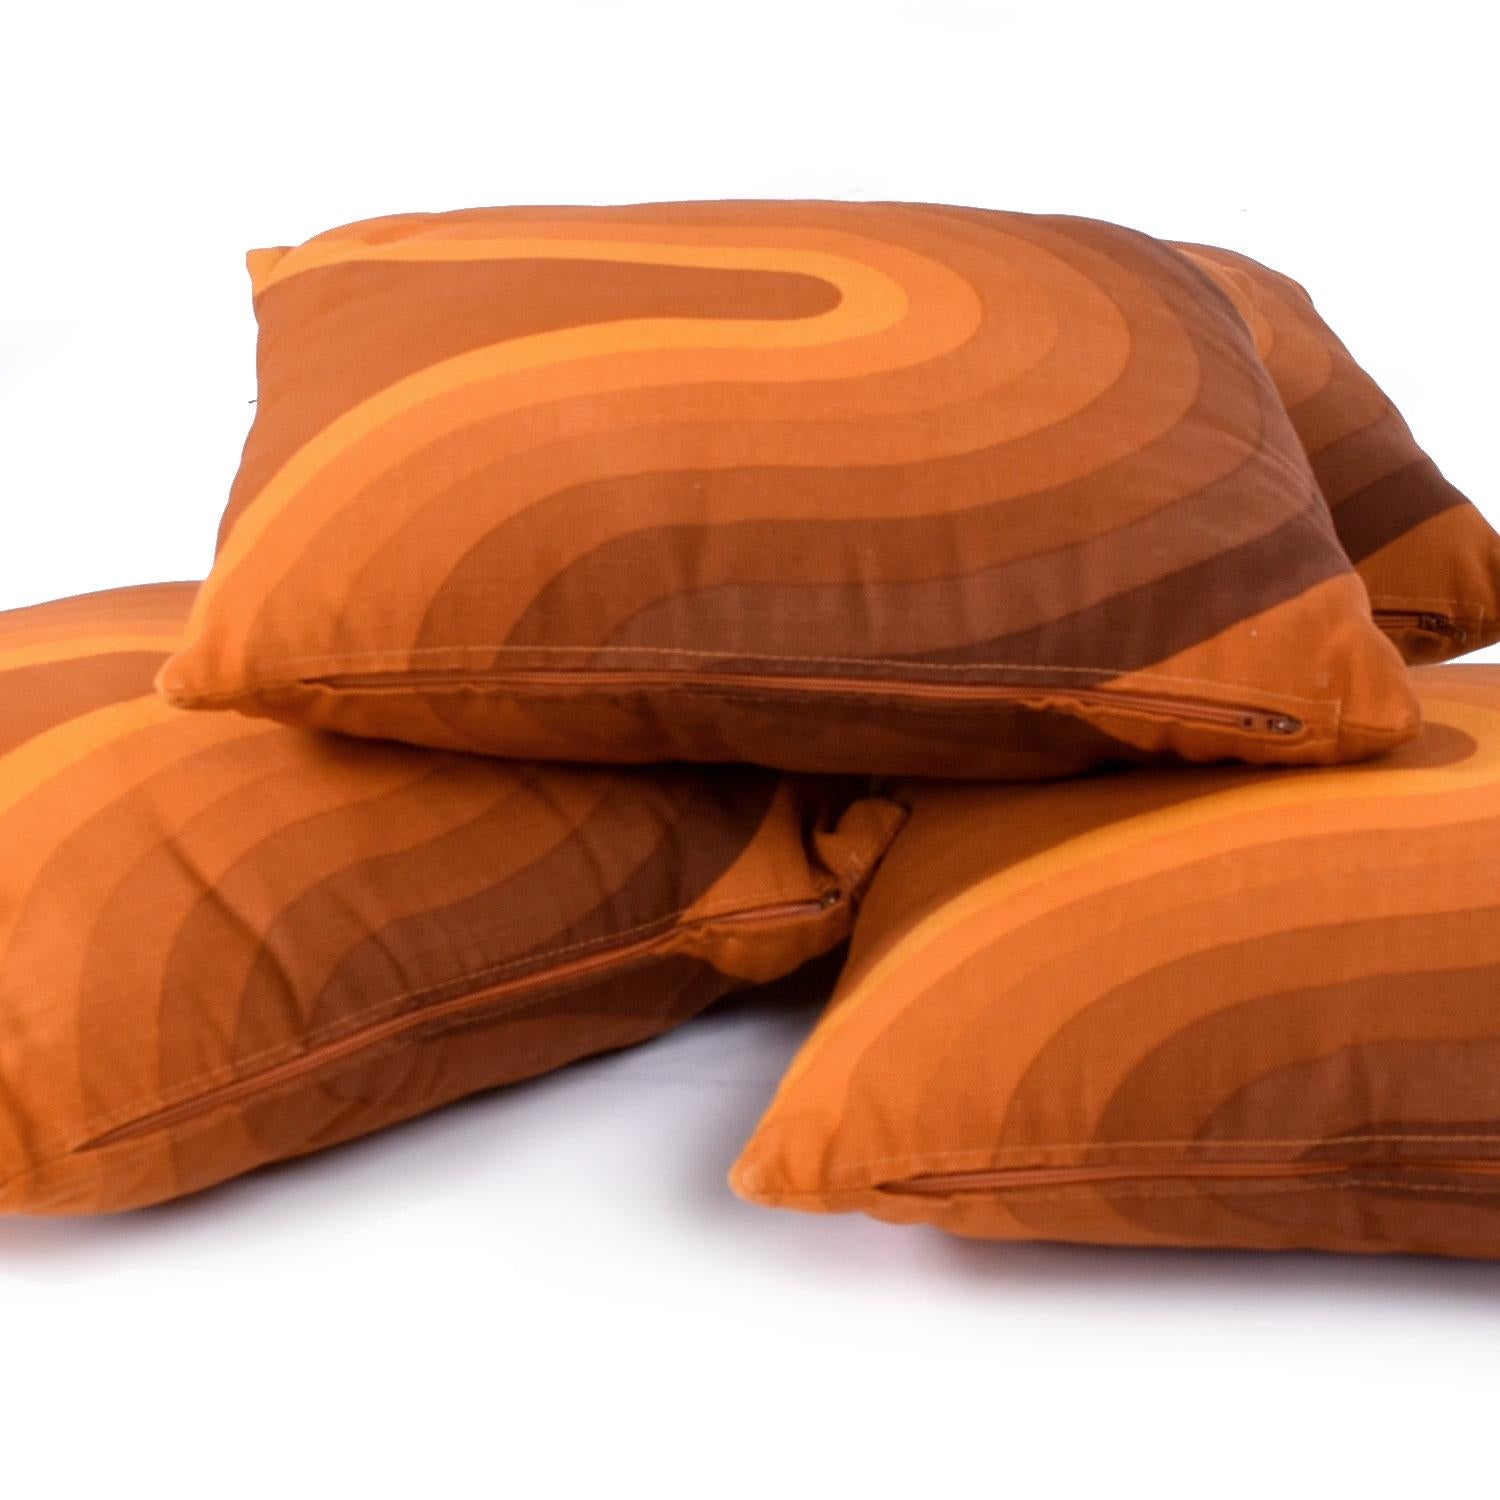 Set of 4 Verner Panton for Mira X Orange Kurve Mid-Century Modern Danish Pillows In Excellent Condition For Sale In Chattanooga, TN